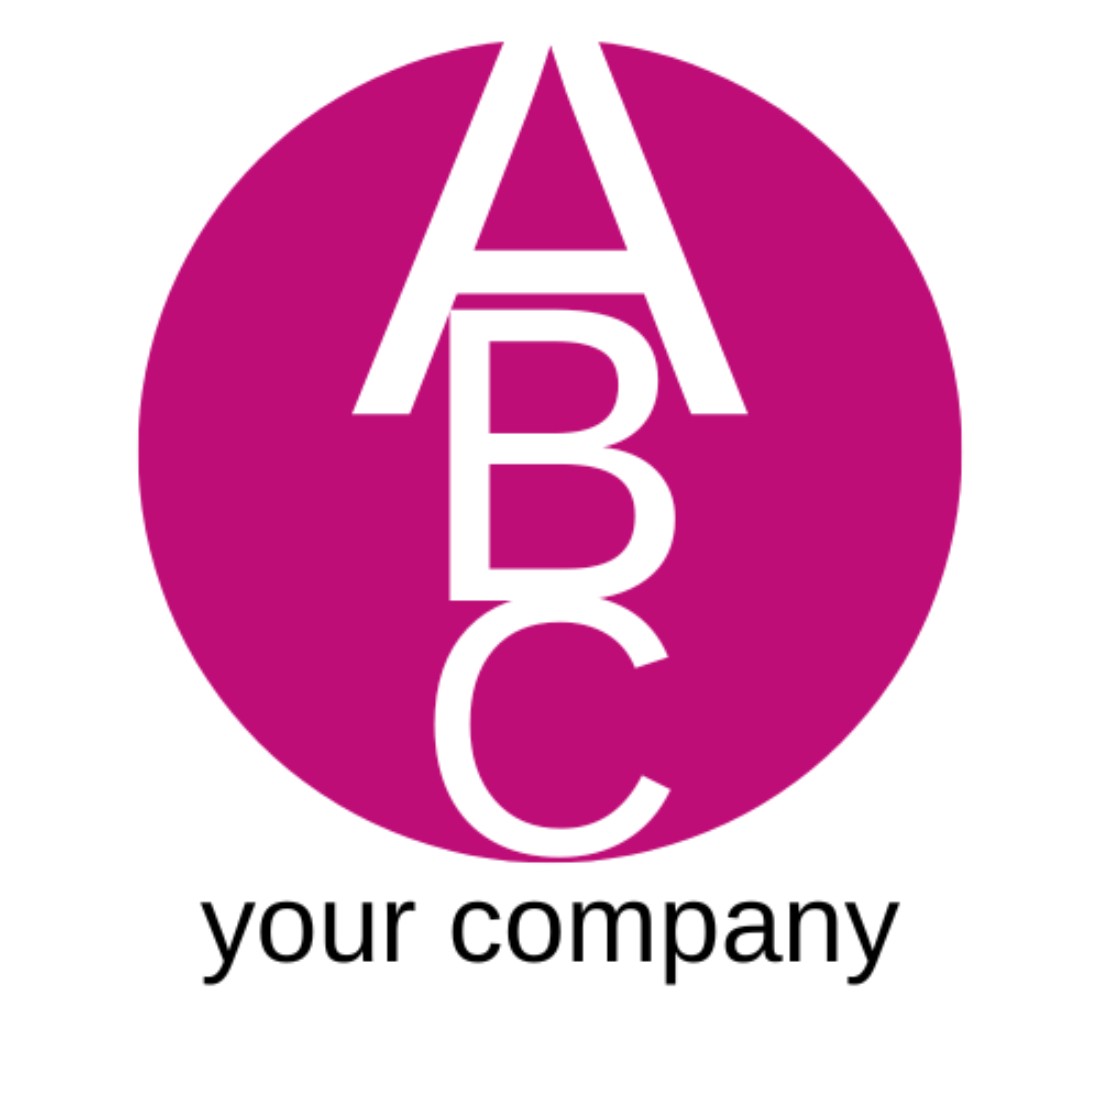 ABC logo (2021) with RGB colors by YTV7 on DeviantArt